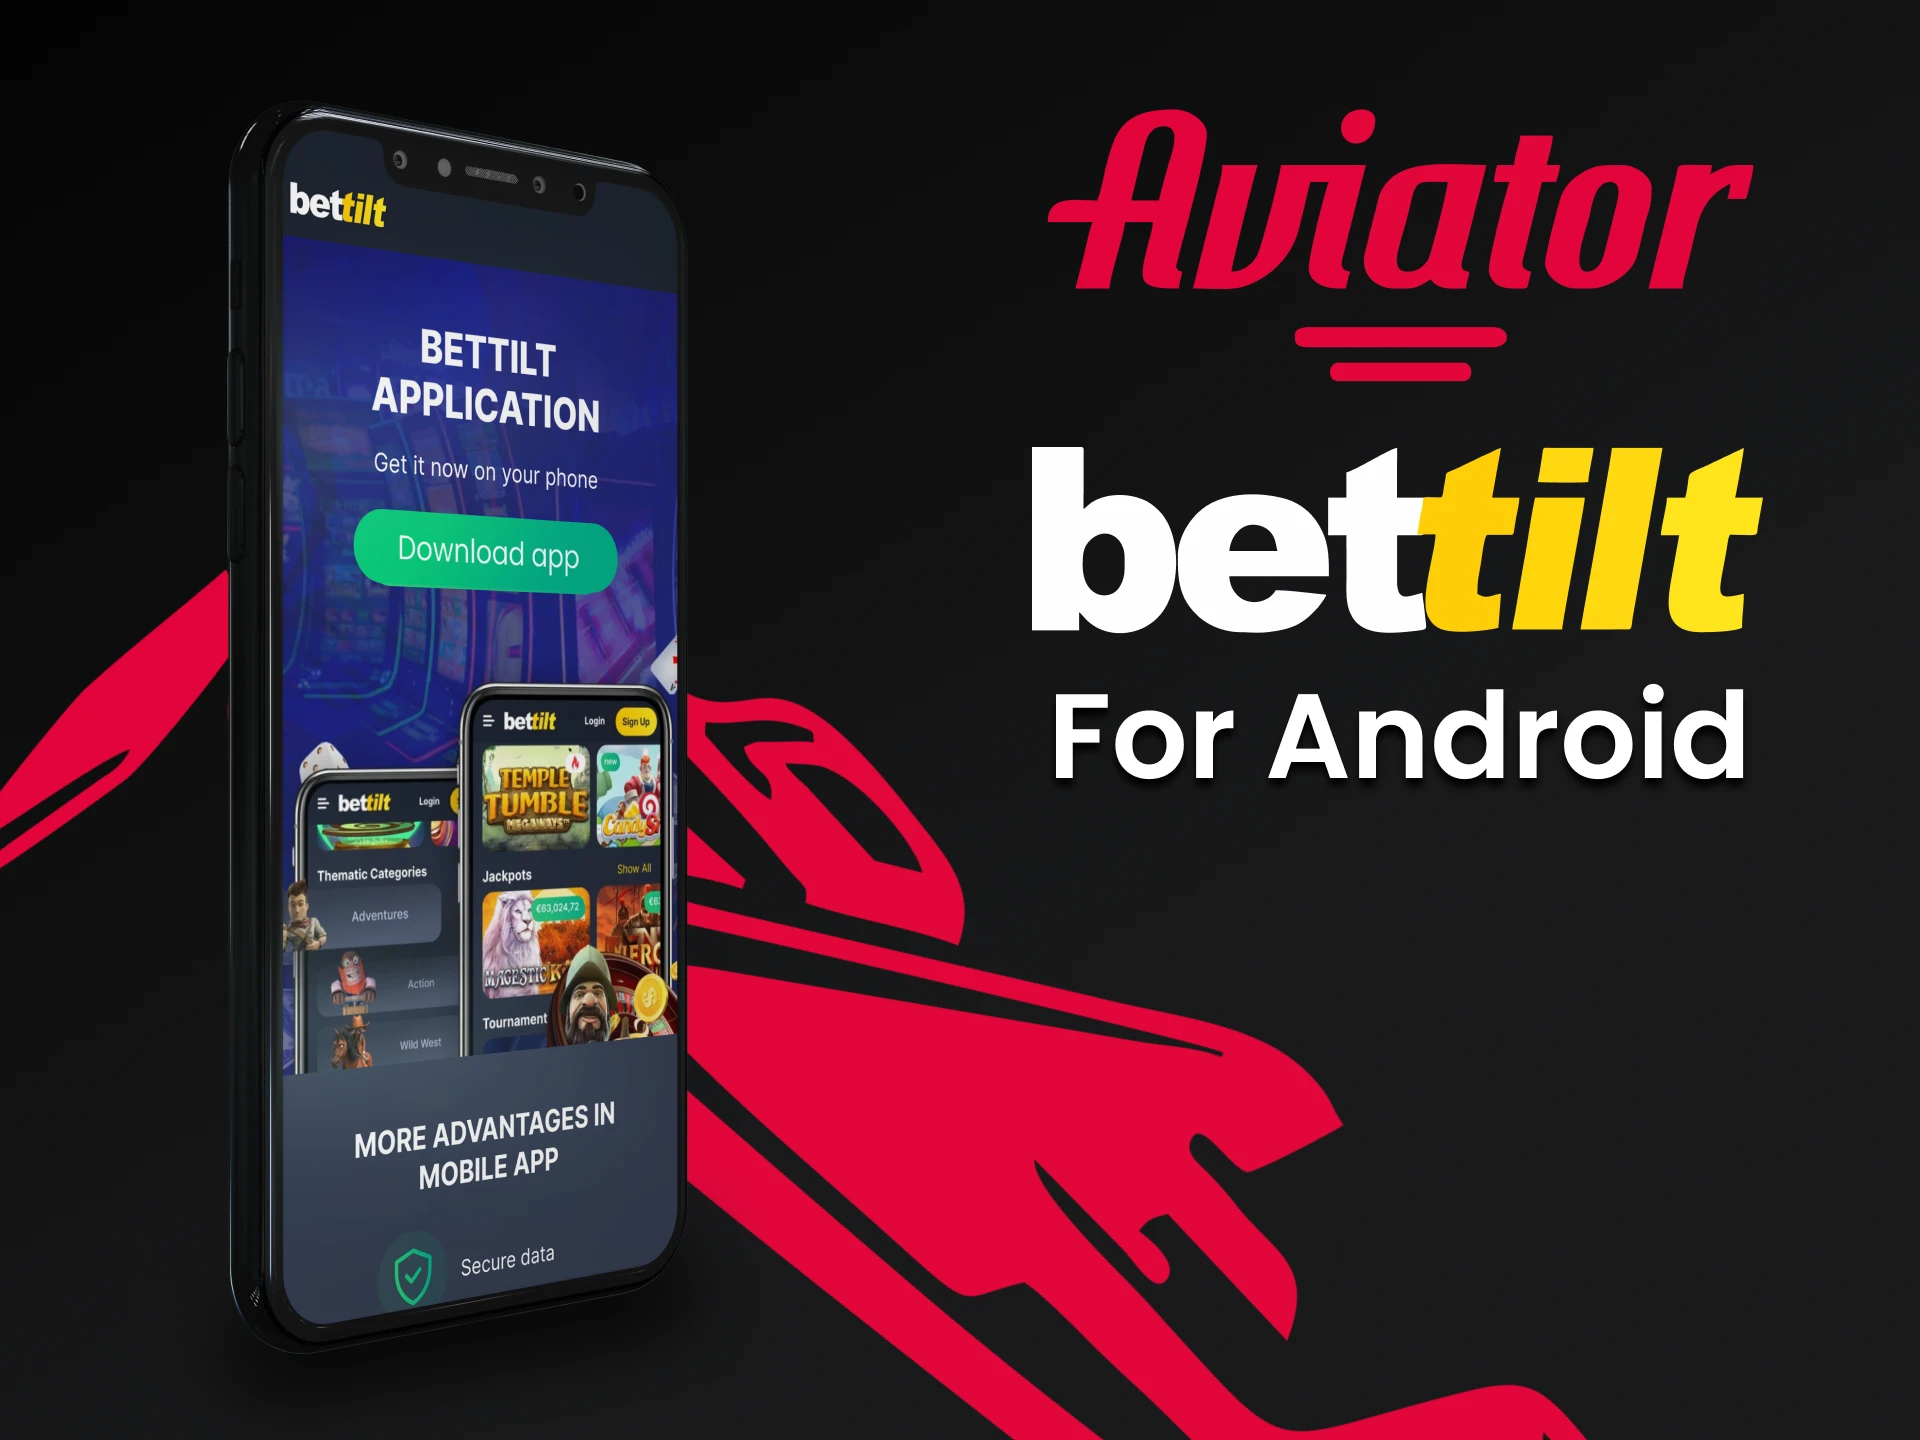 Download Bettilt on android to play Aviator.